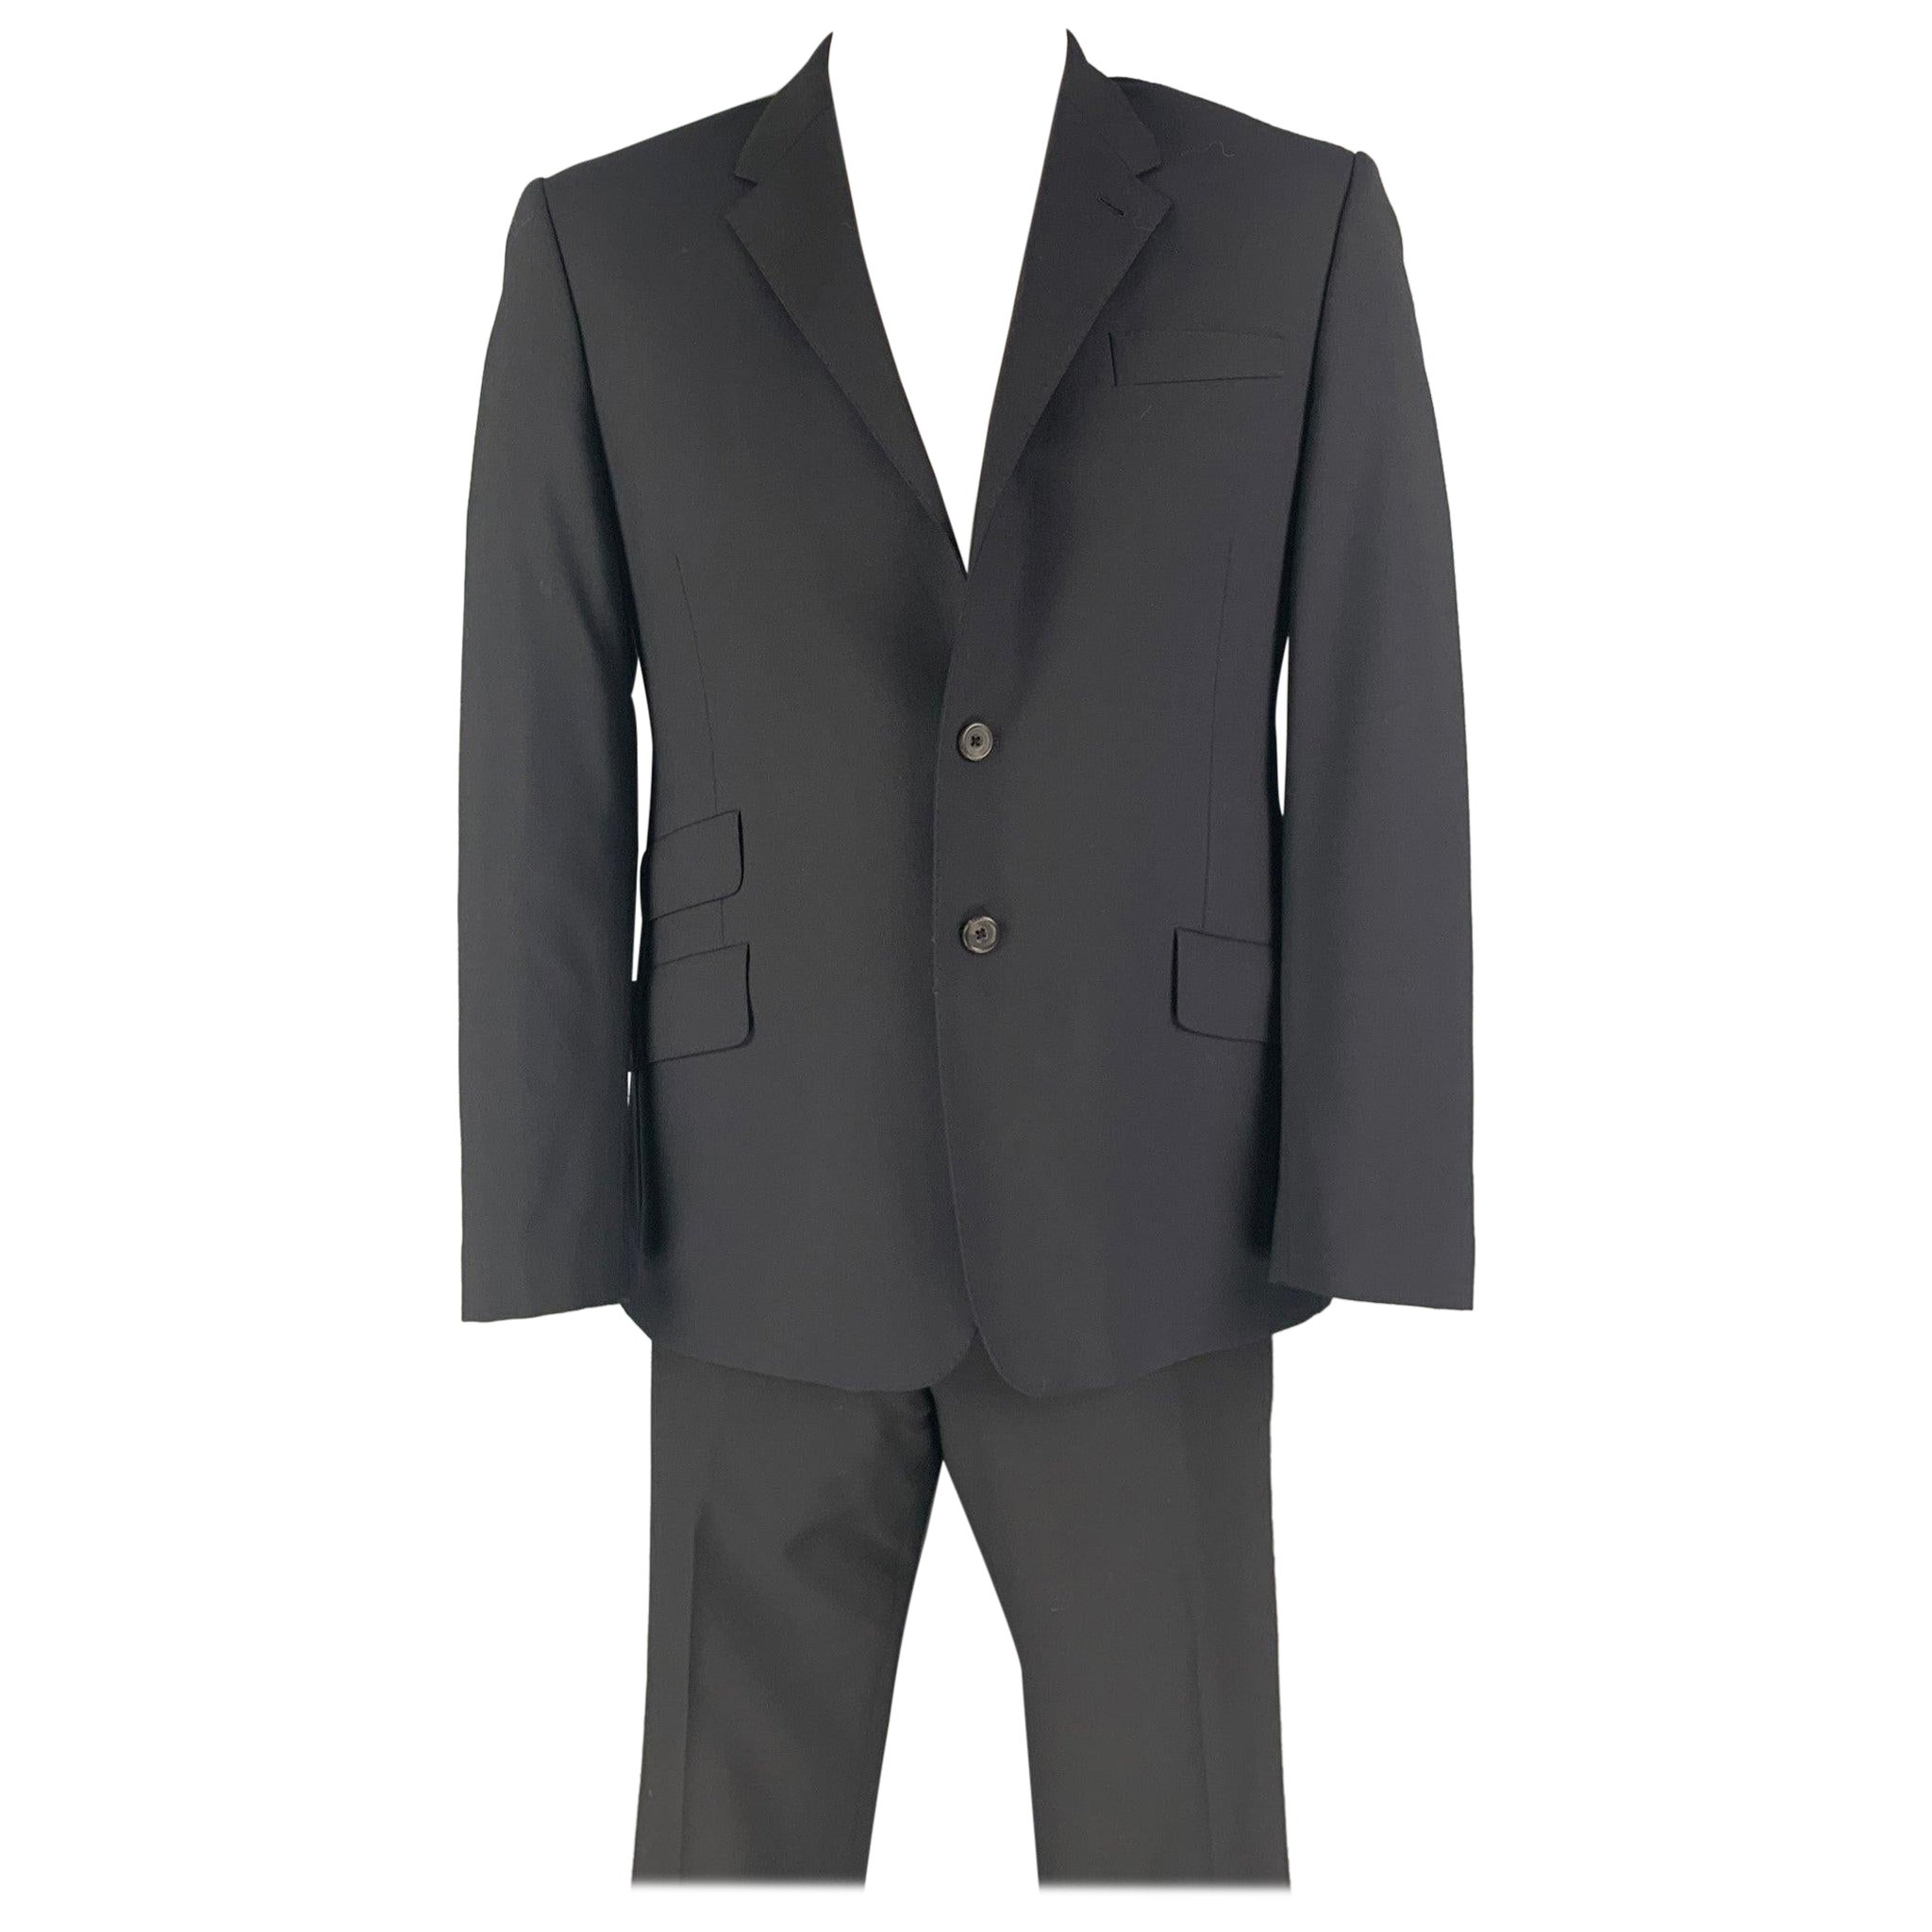 PAUL SMITH Size 42 Regular Black Wool Single Breasted Suit